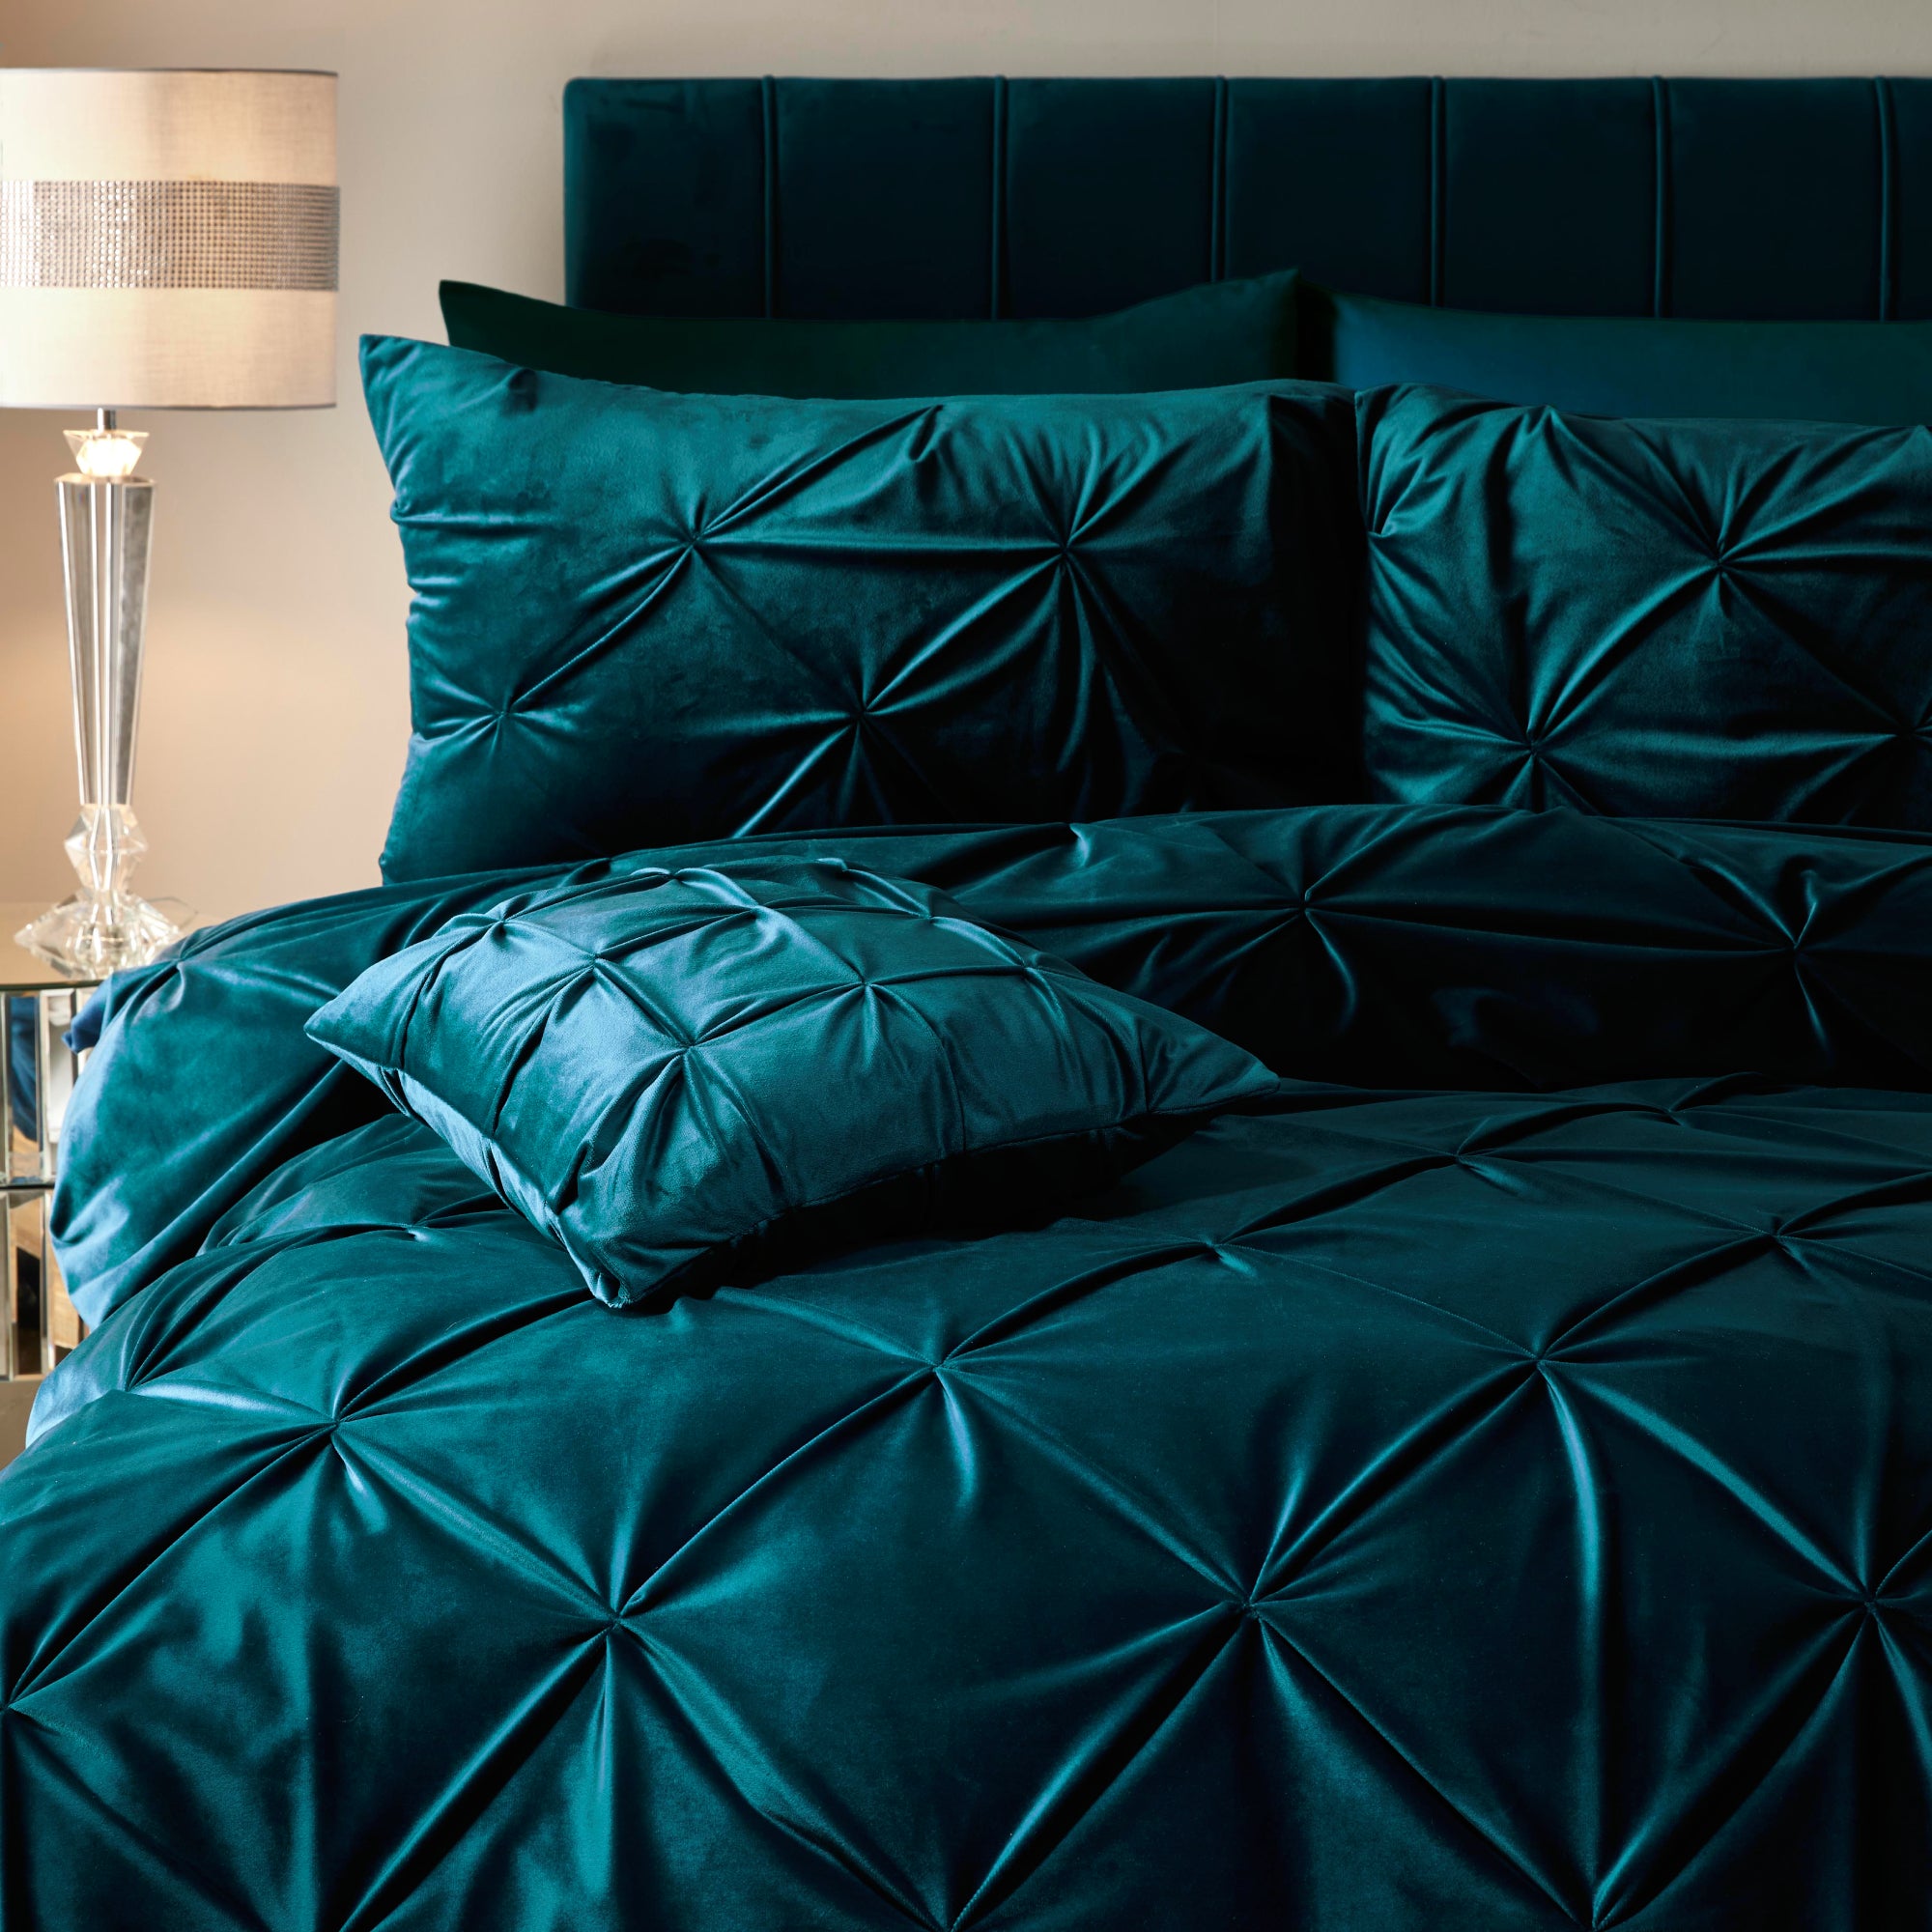 Duvet Cover Set Mira by Soiree in Teal